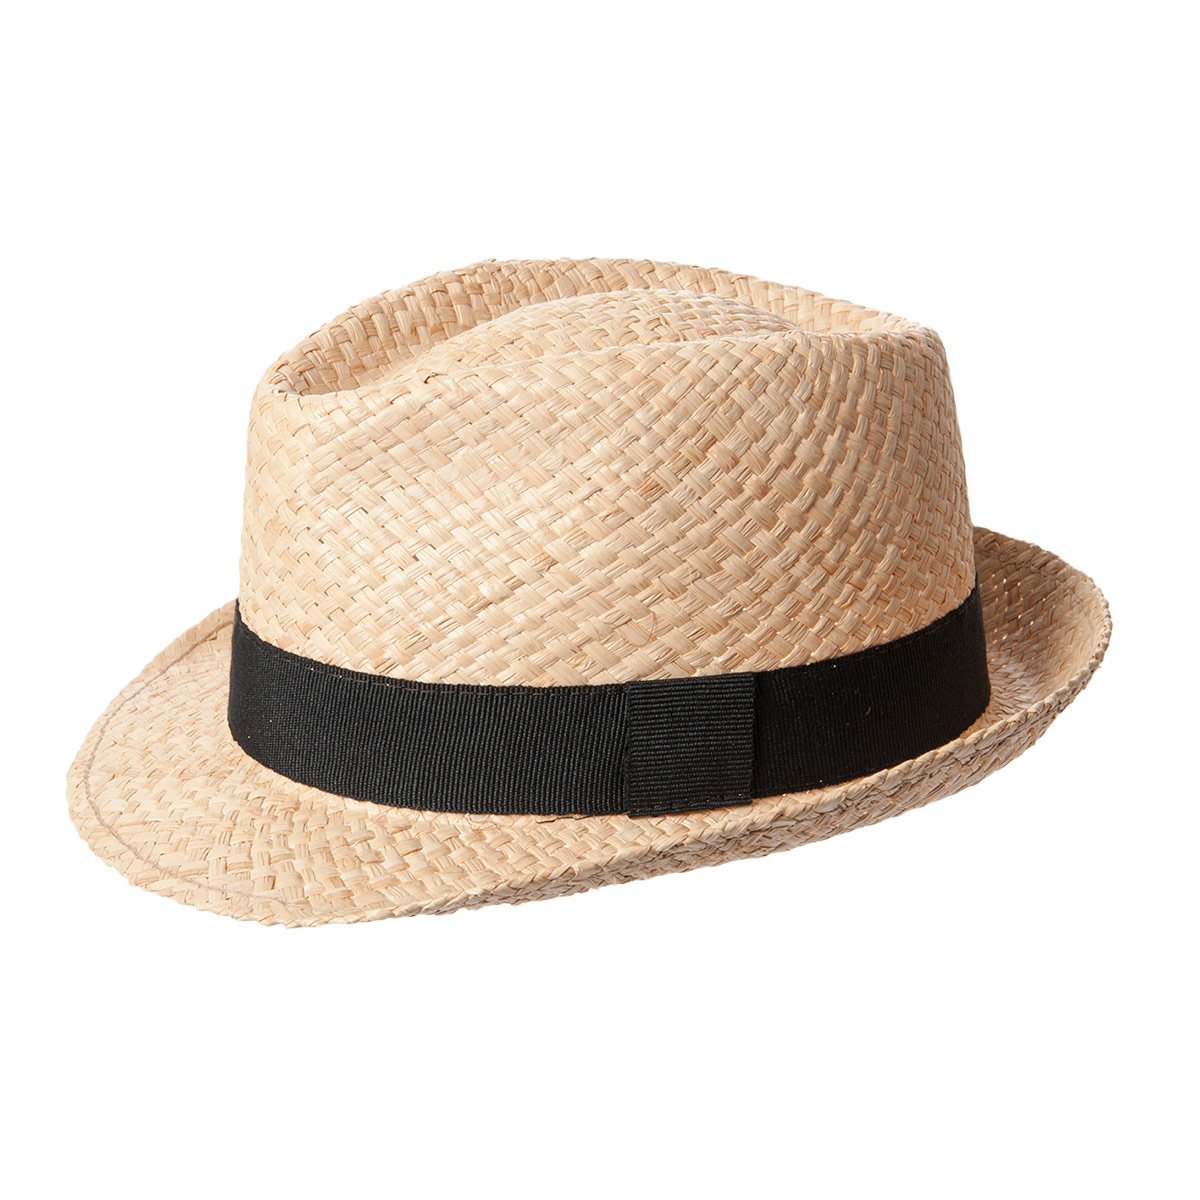 Trilby sun made of 100% straw